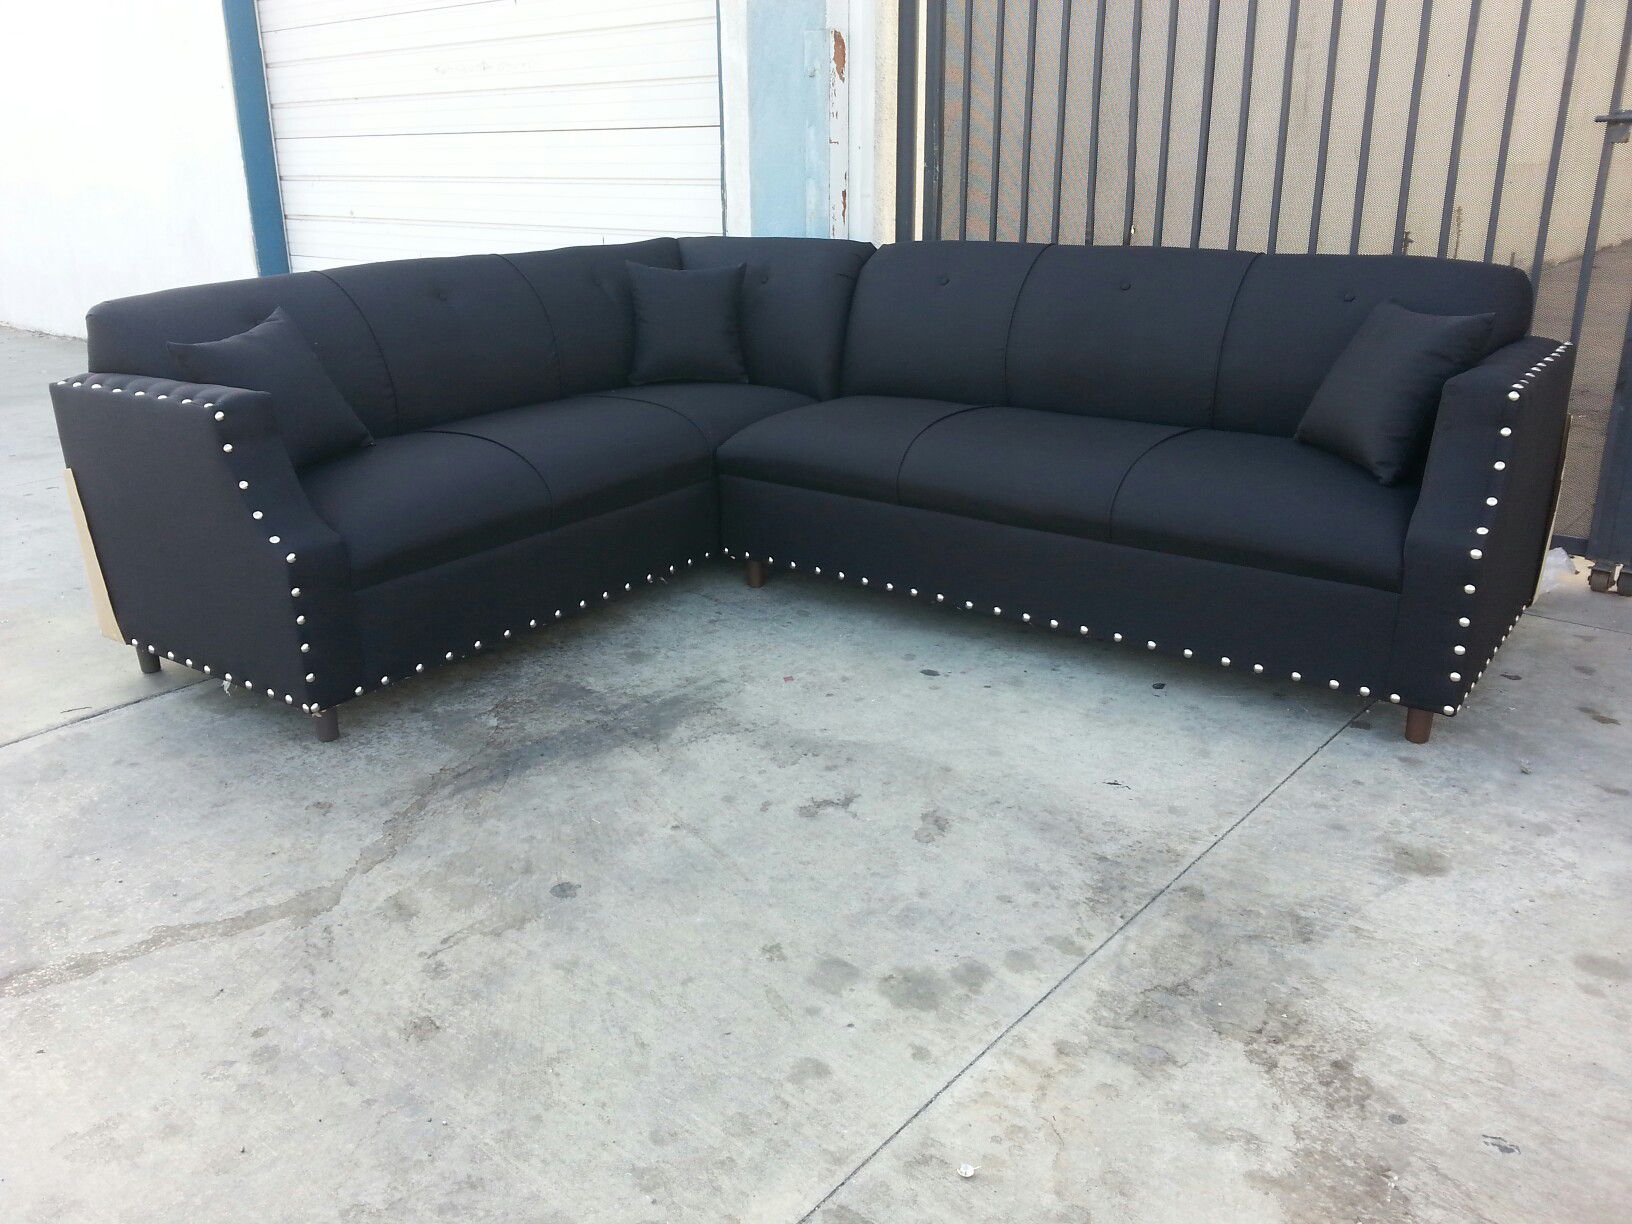 NEW 7X9FT DOMINO BLACK FABRIC SECTIONAL COUCHES